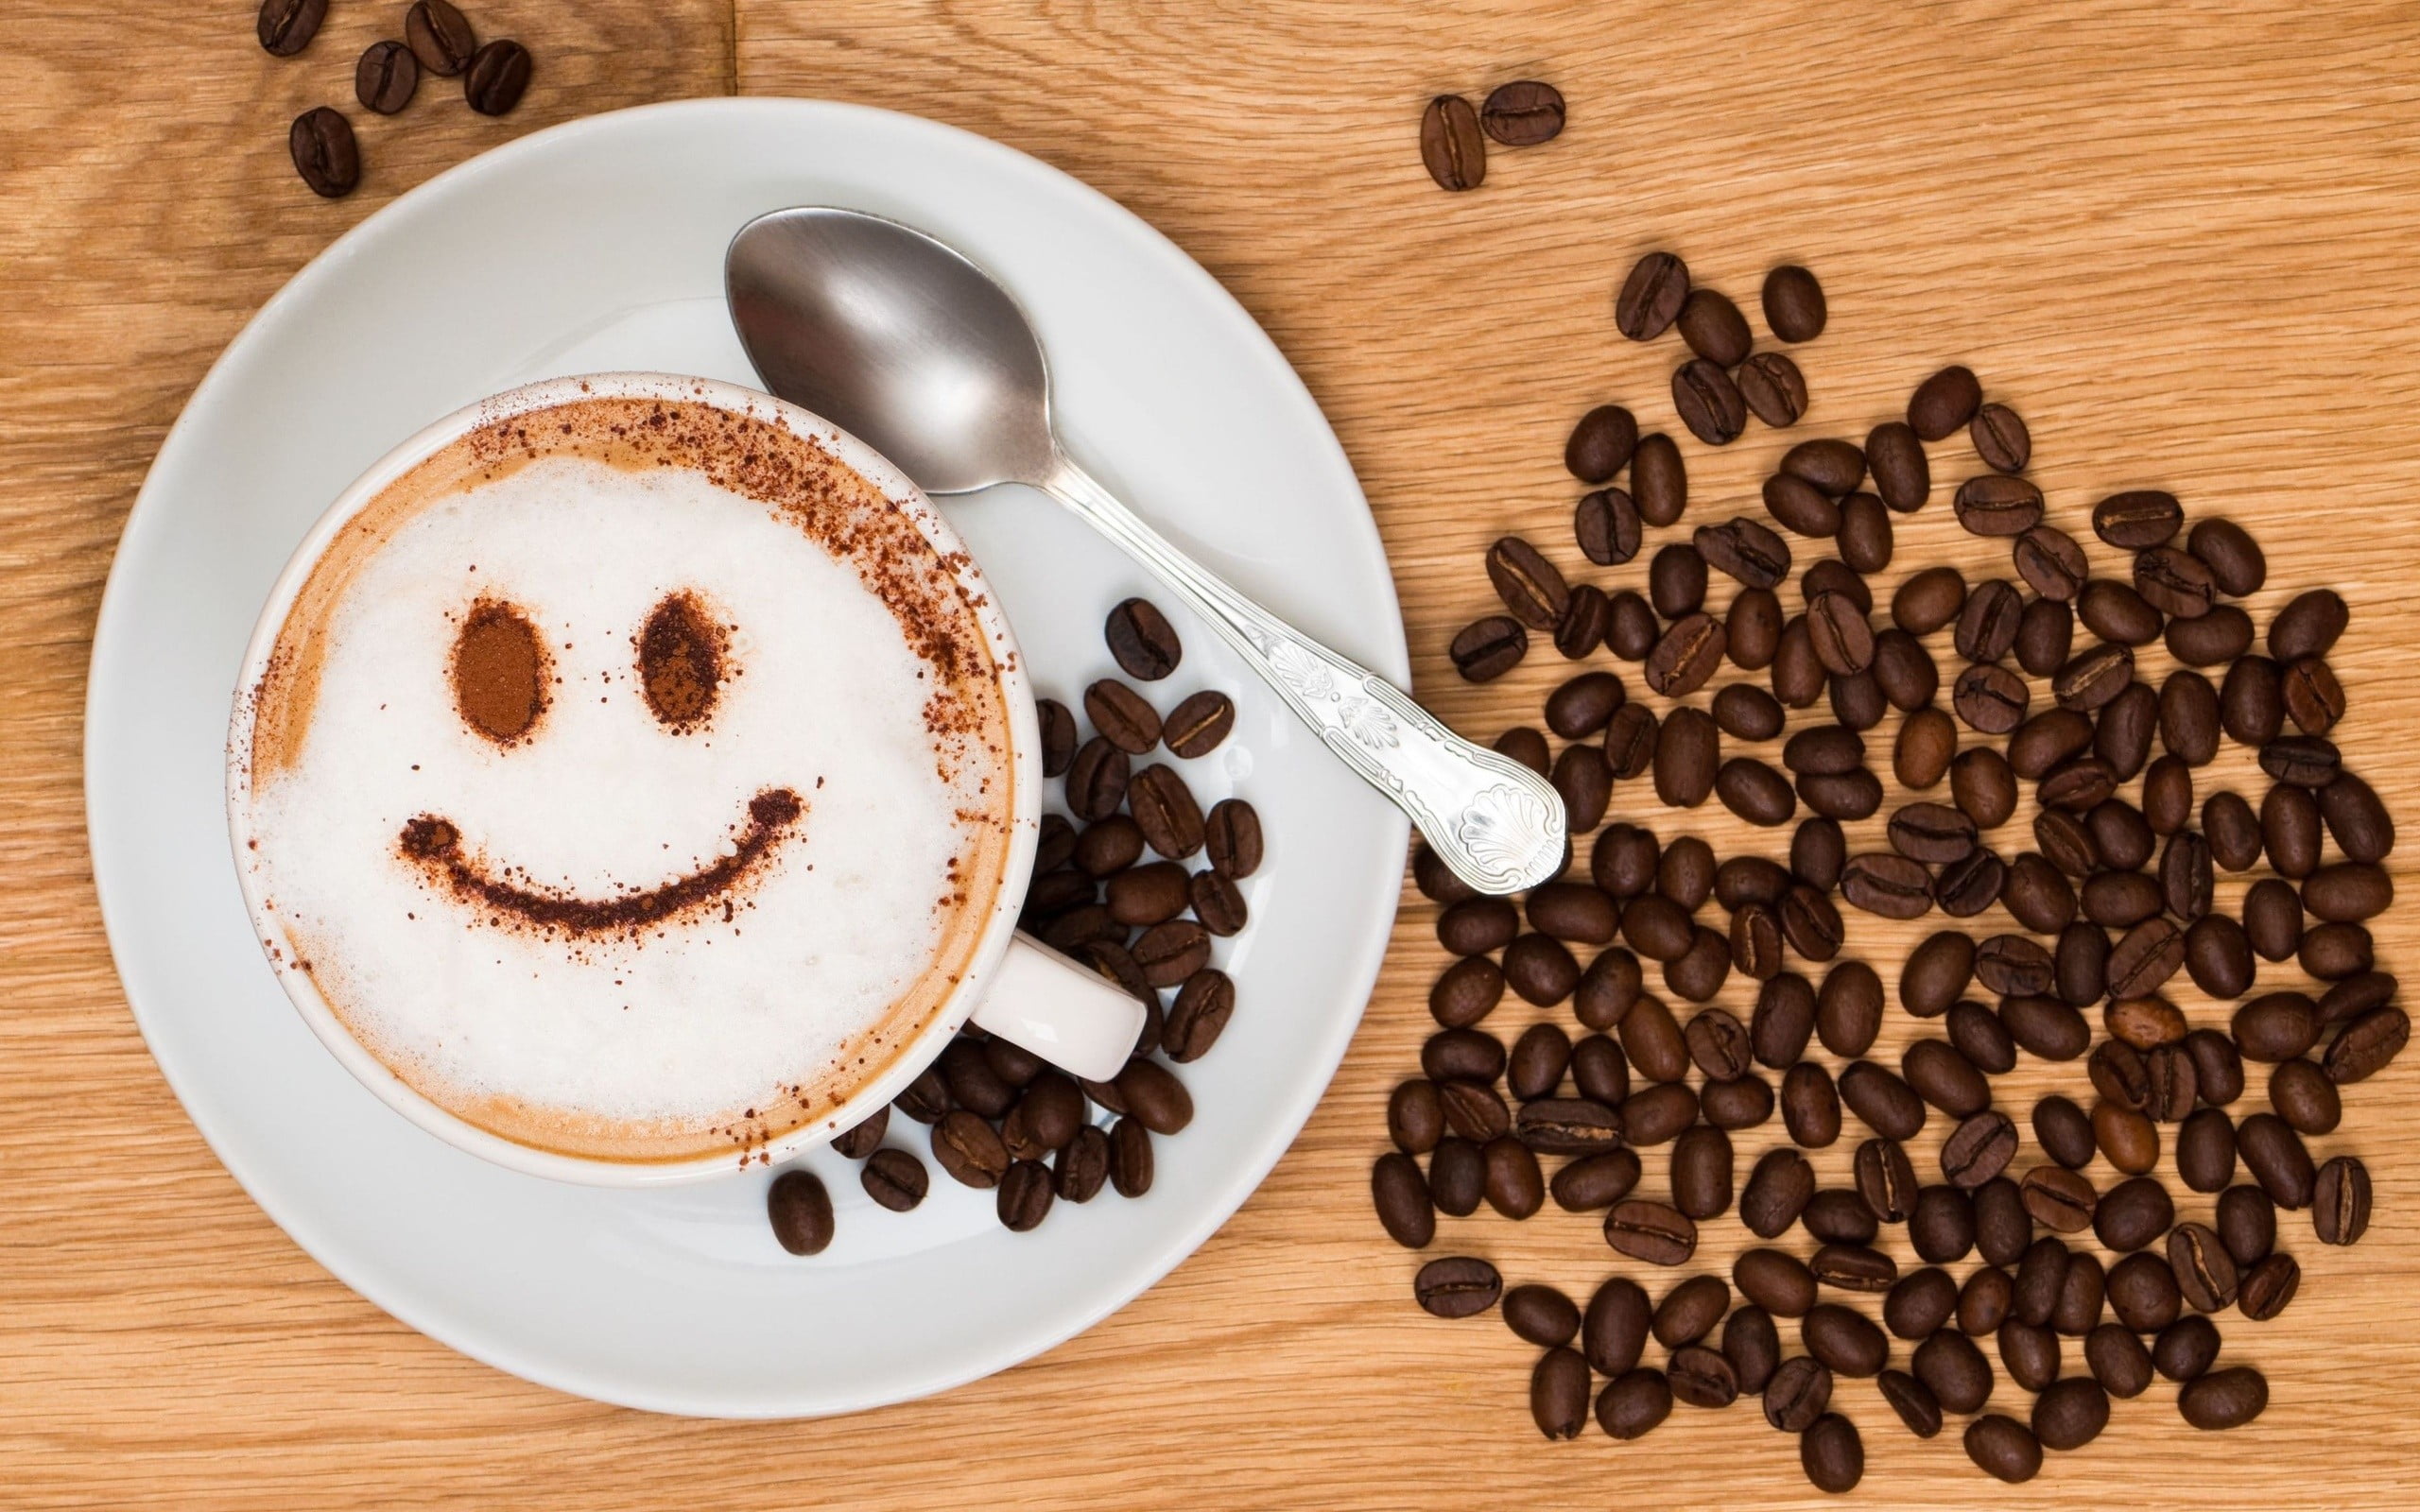 brown coffee beans, drink, smiley, spoon, cup, food and drink